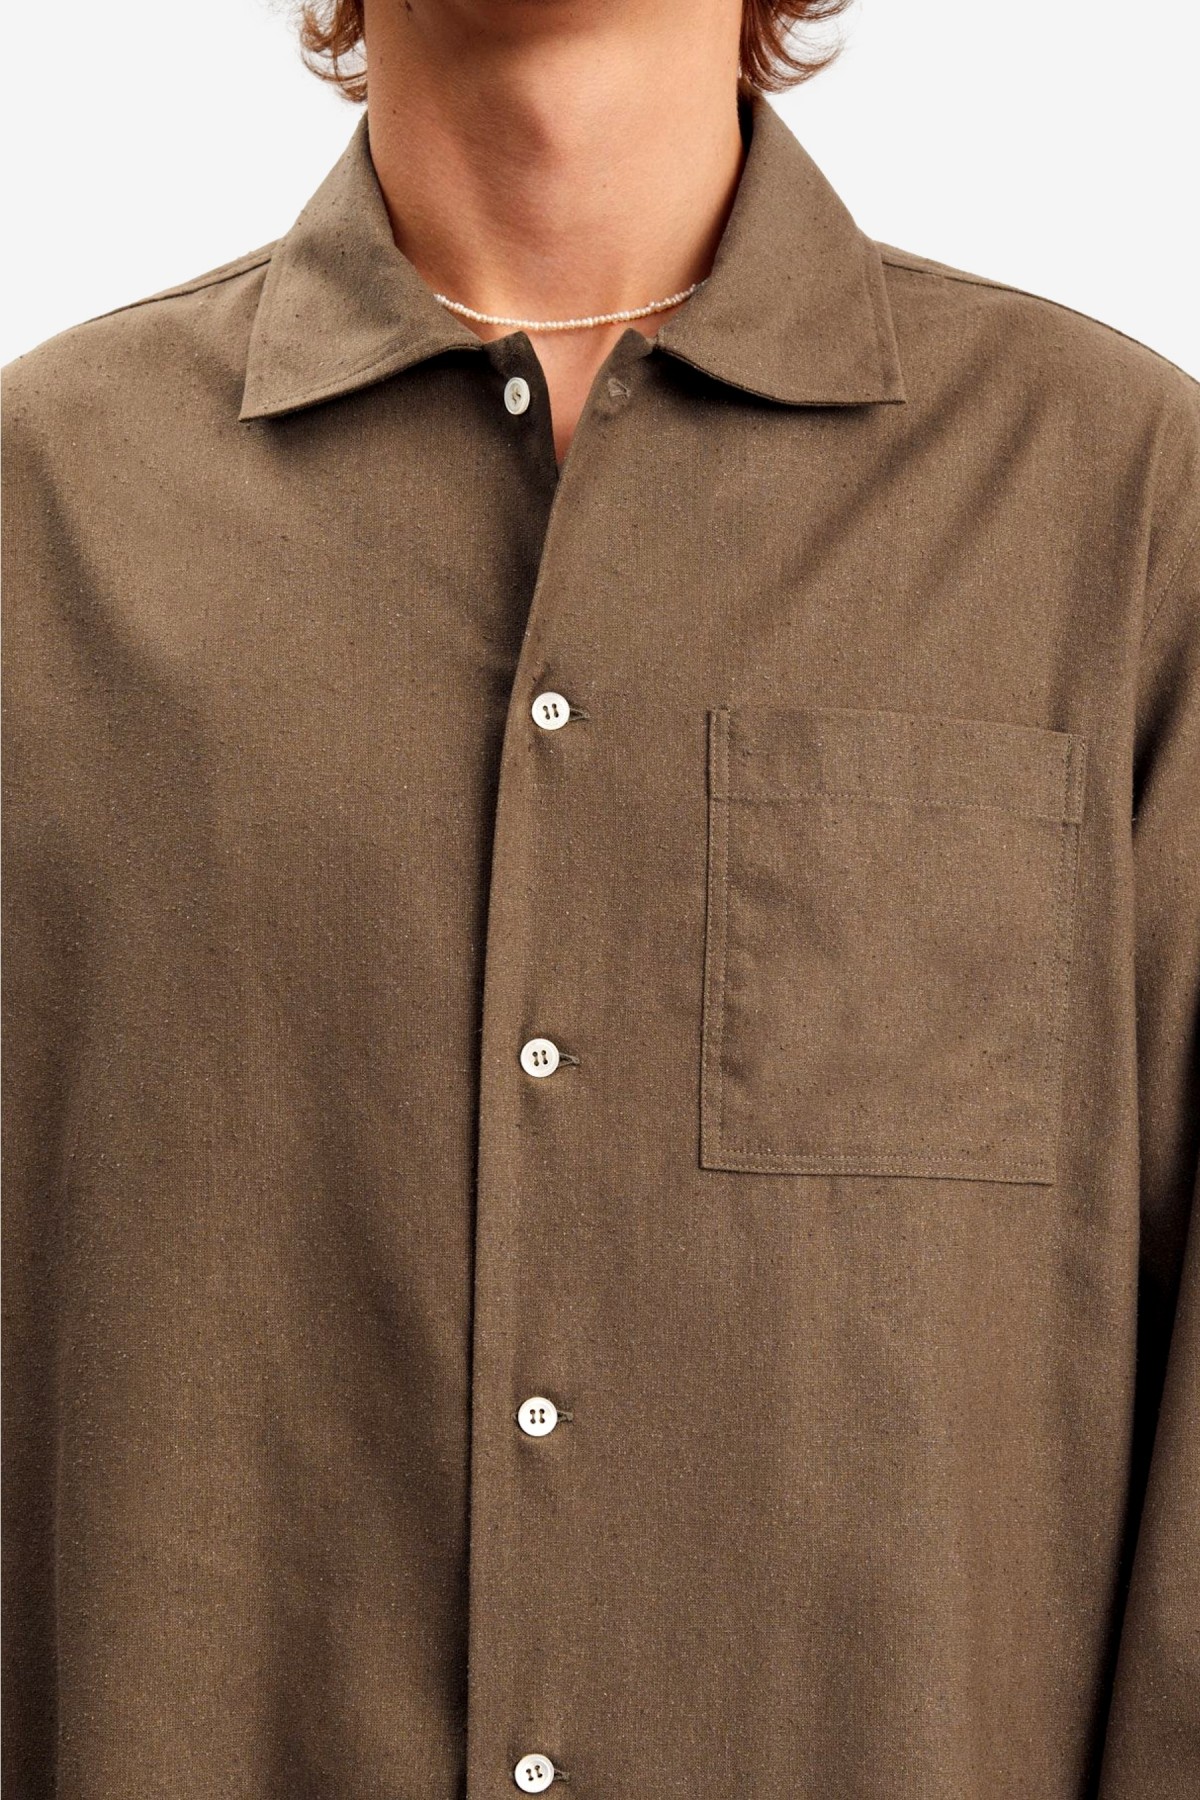 Another Aspect Shirt 2.1 in Village Green